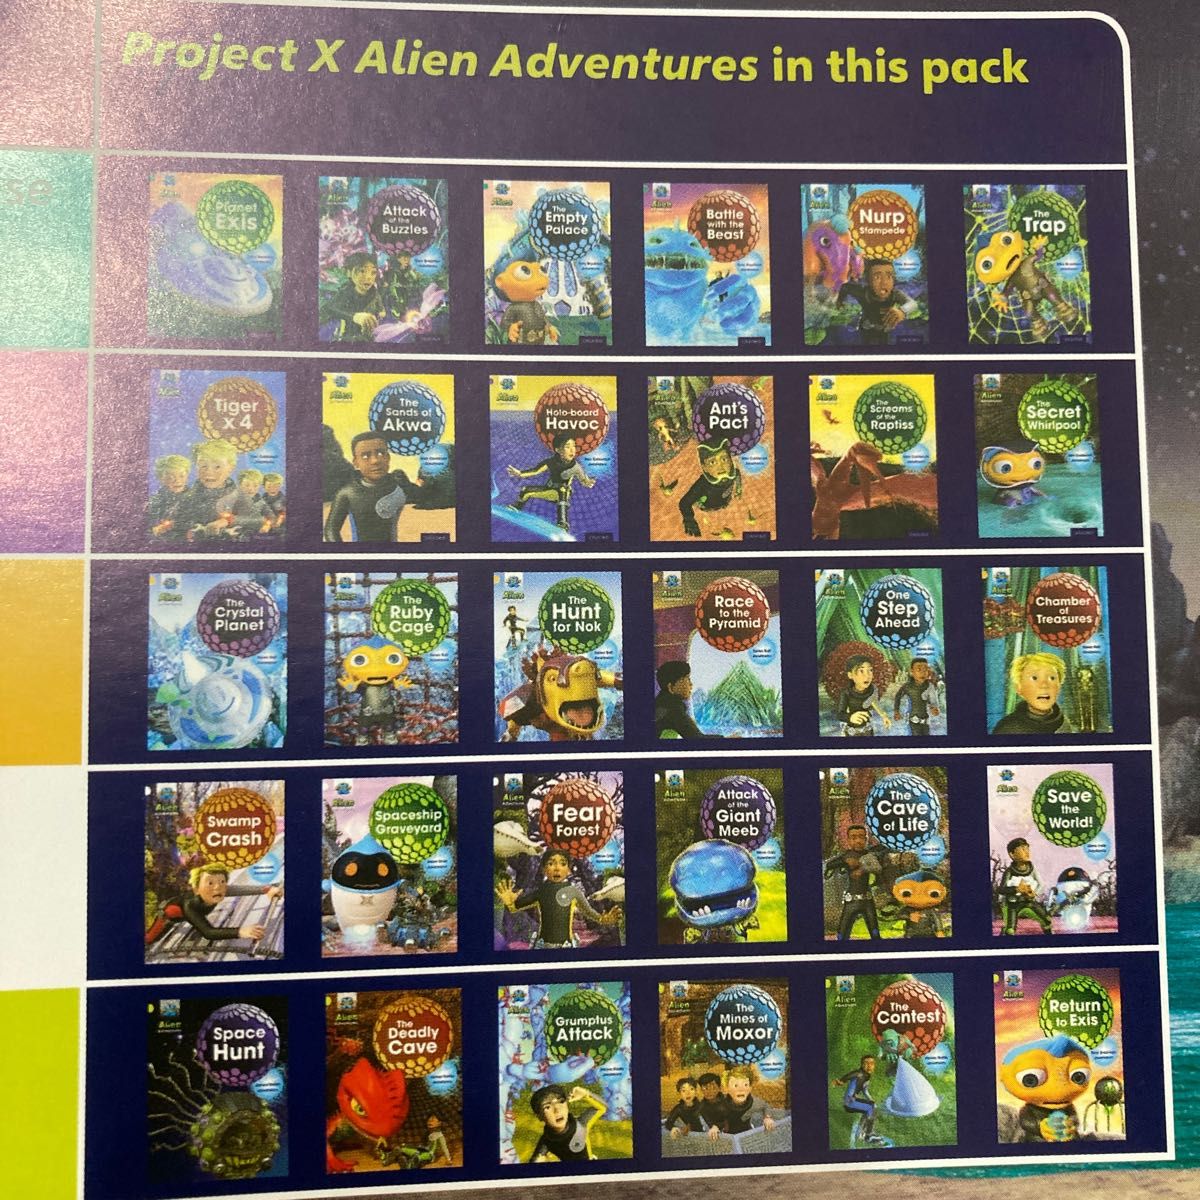 Oxford reading tree Project X Alien Adventures シリーズ1 31冊　英語　洋書